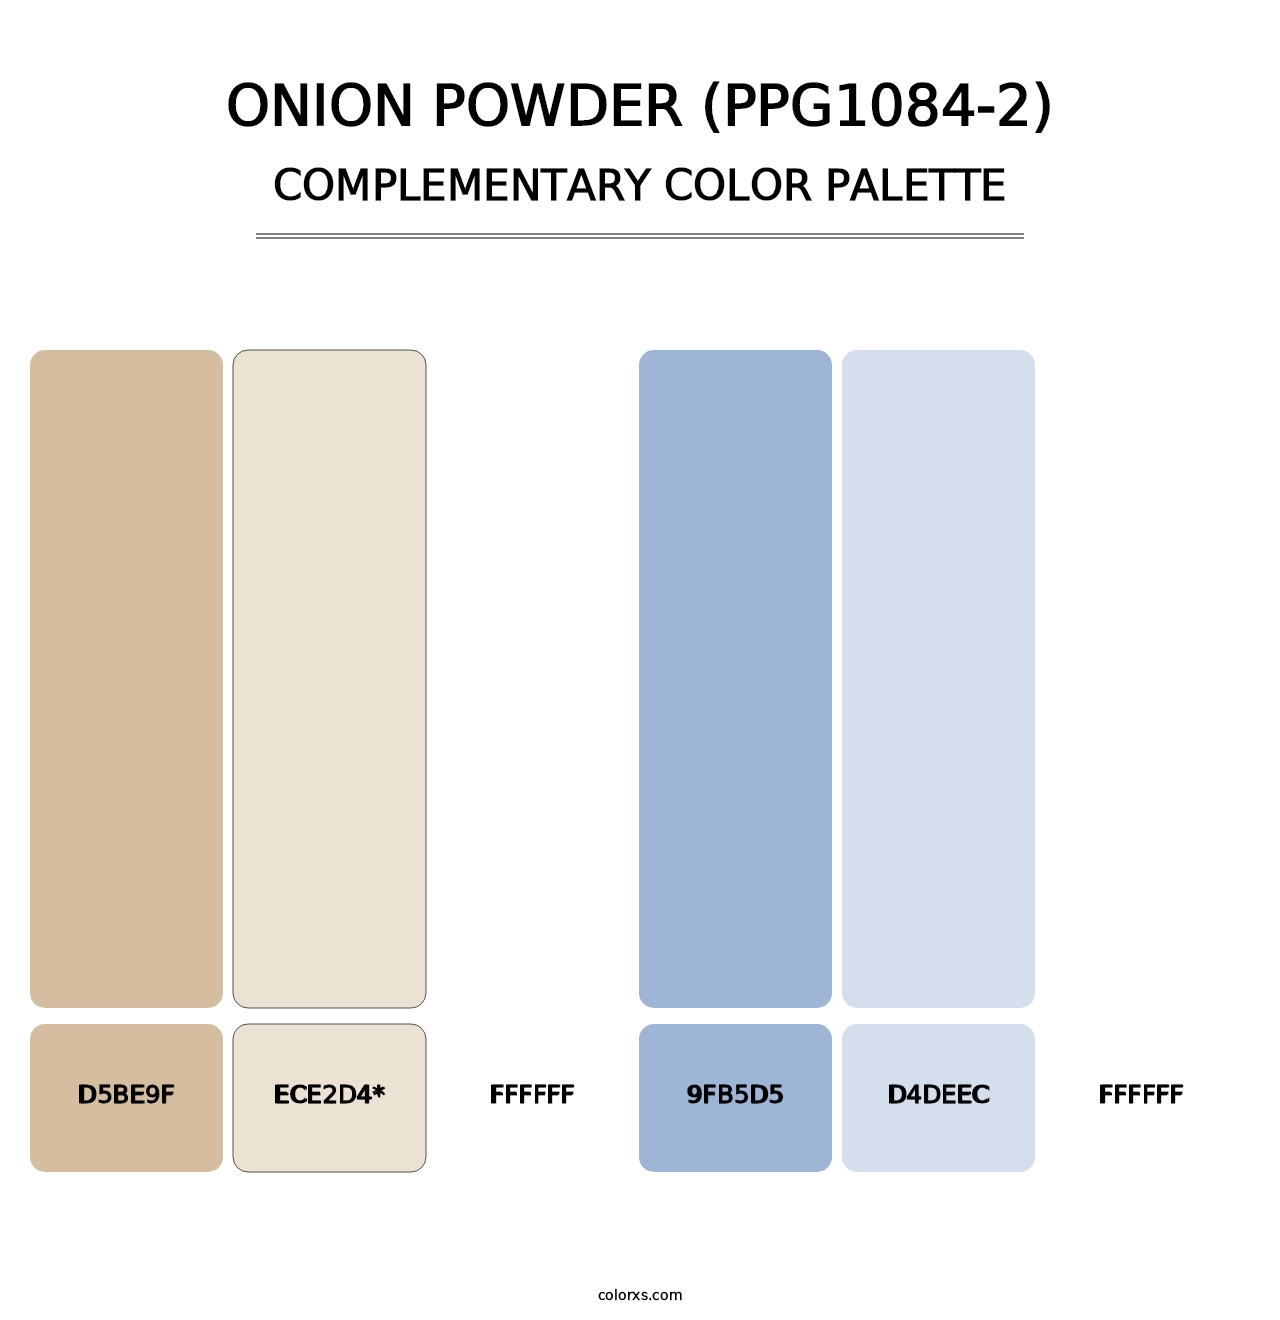 Onion Powder (PPG1084-2) - Complementary Color Palette